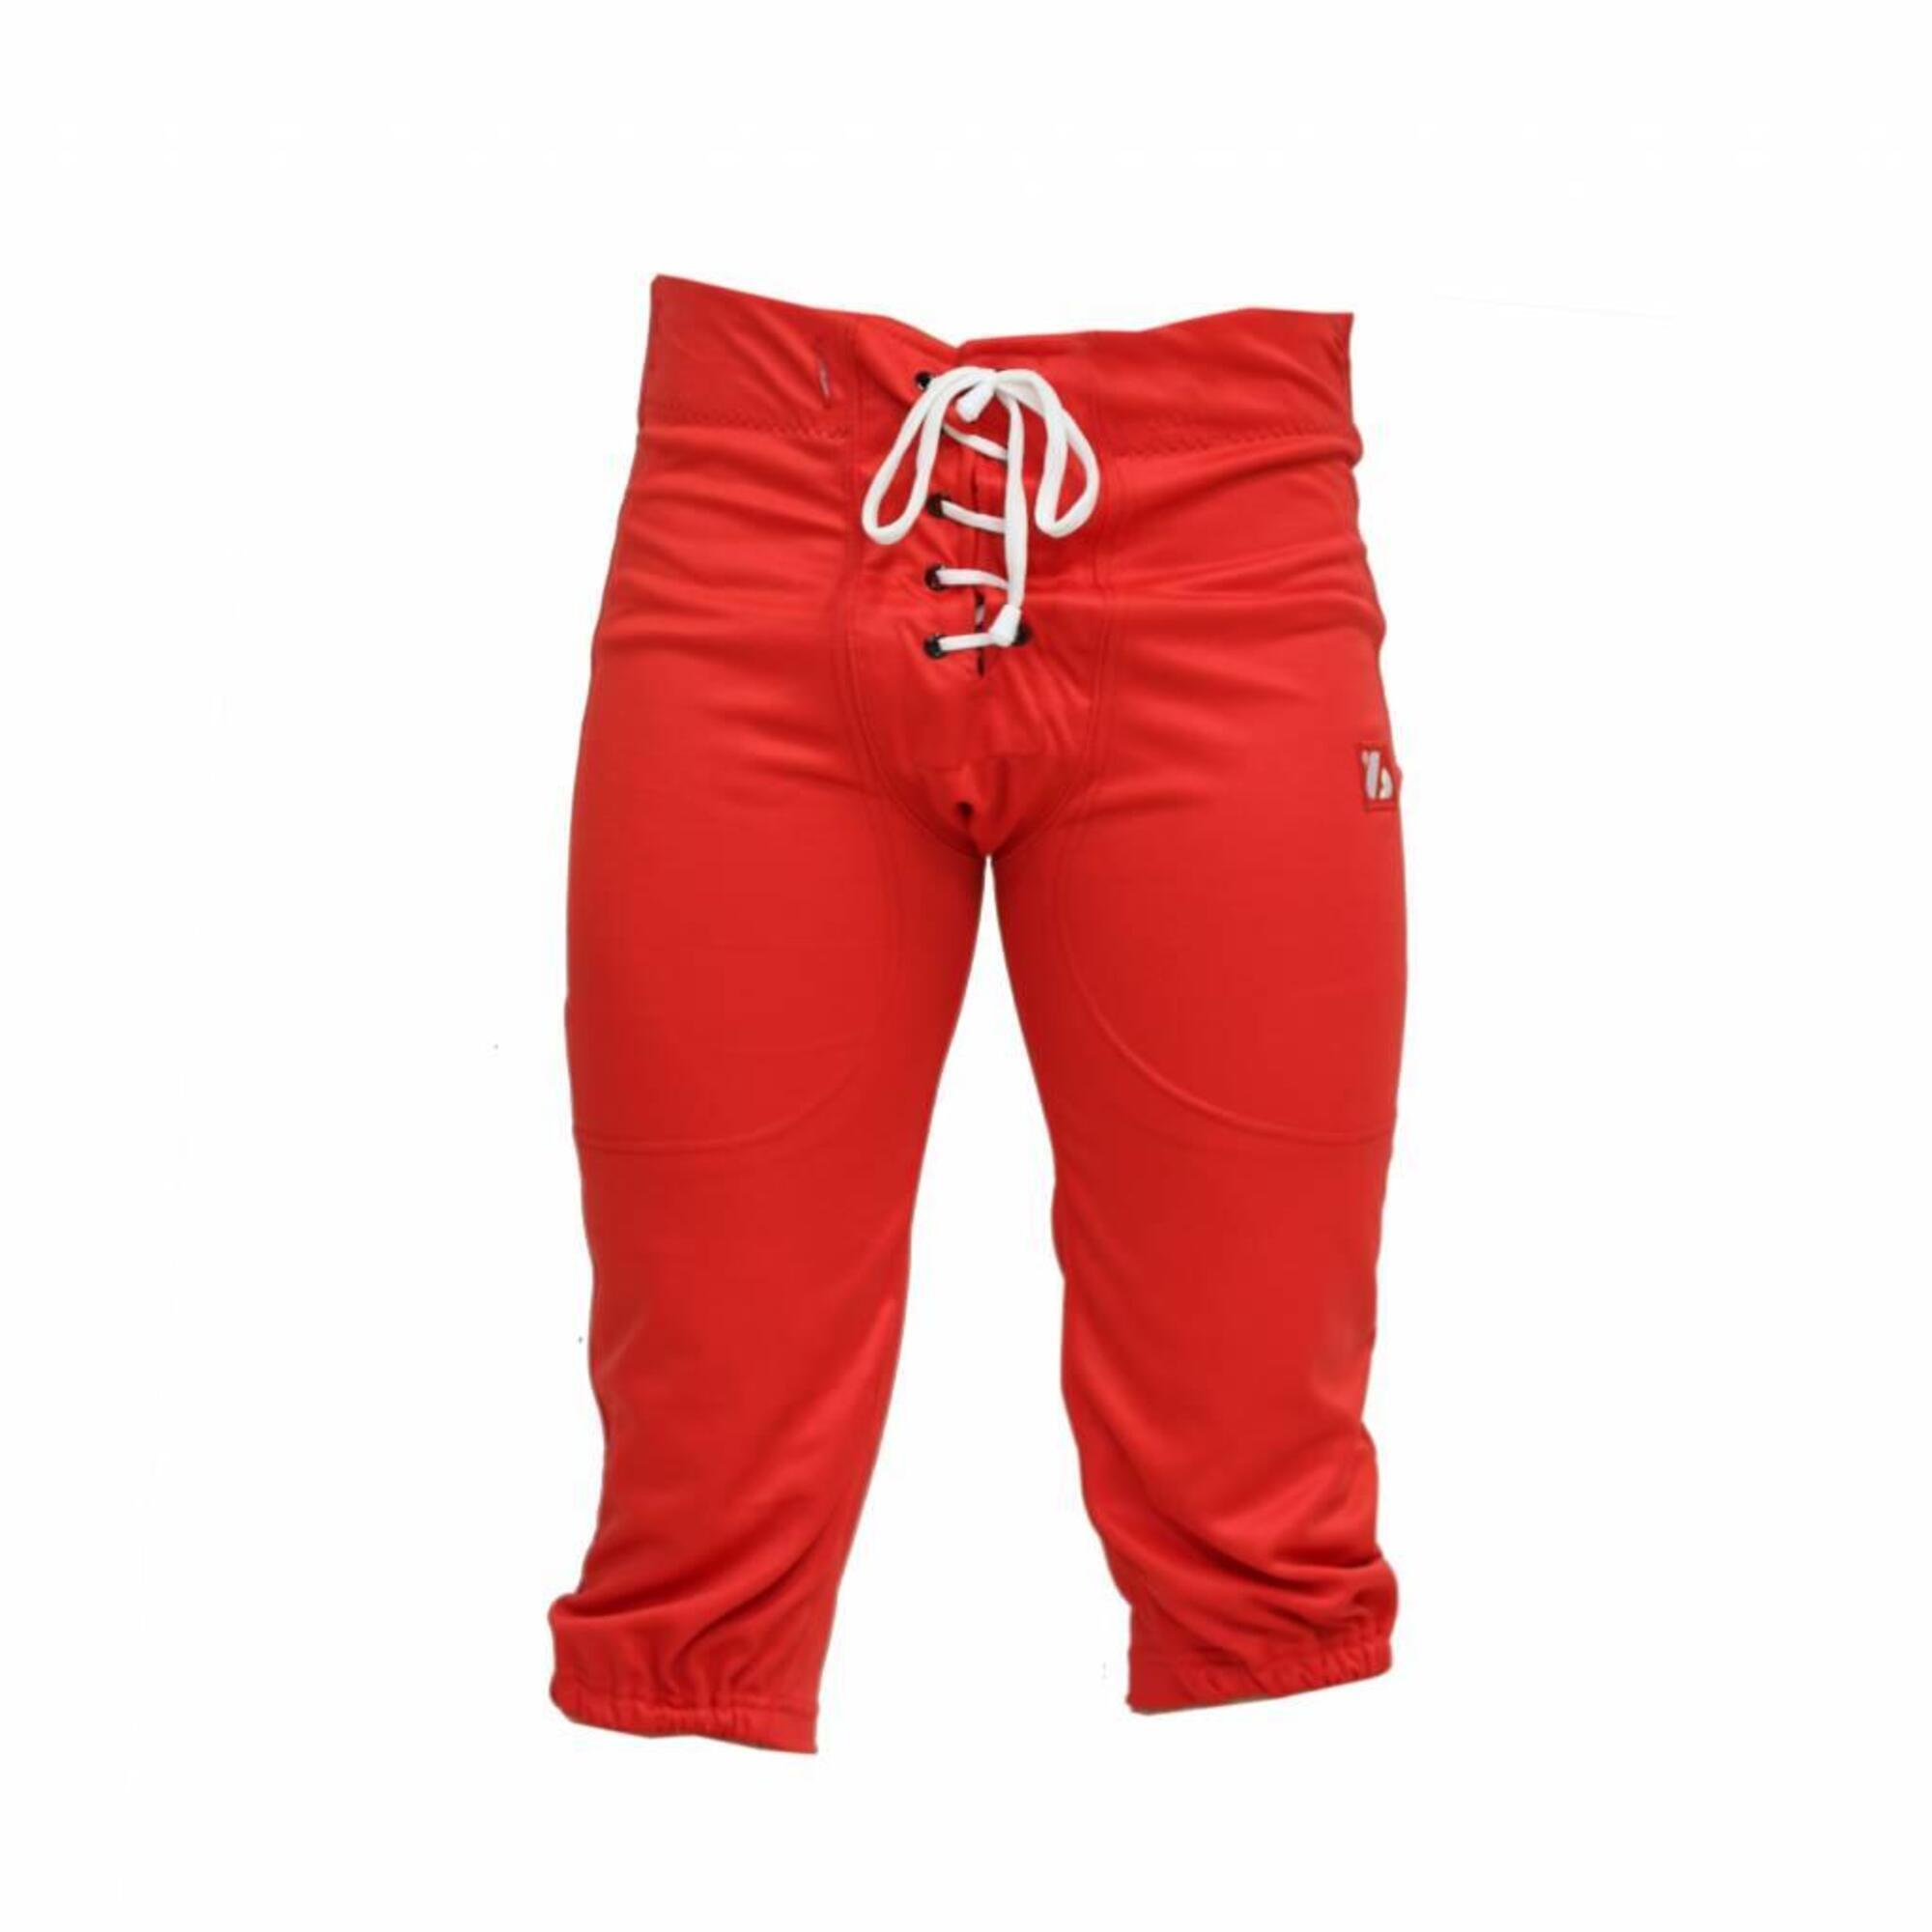  American football pants, match FP-2 Red 1/2